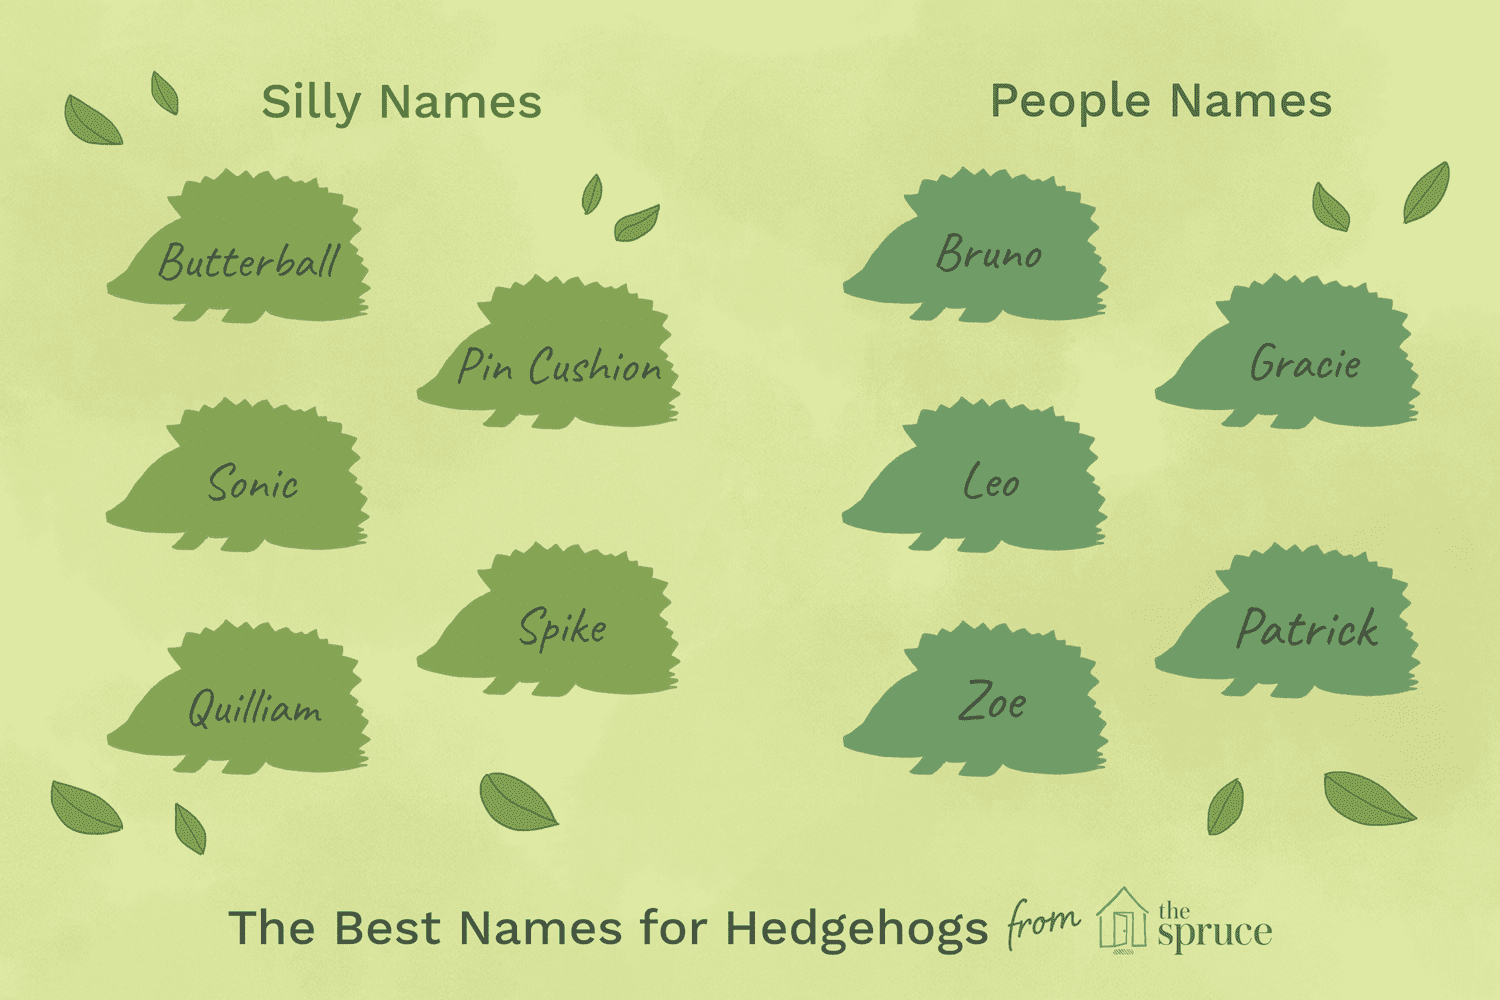 What is another name for a hedgehog?